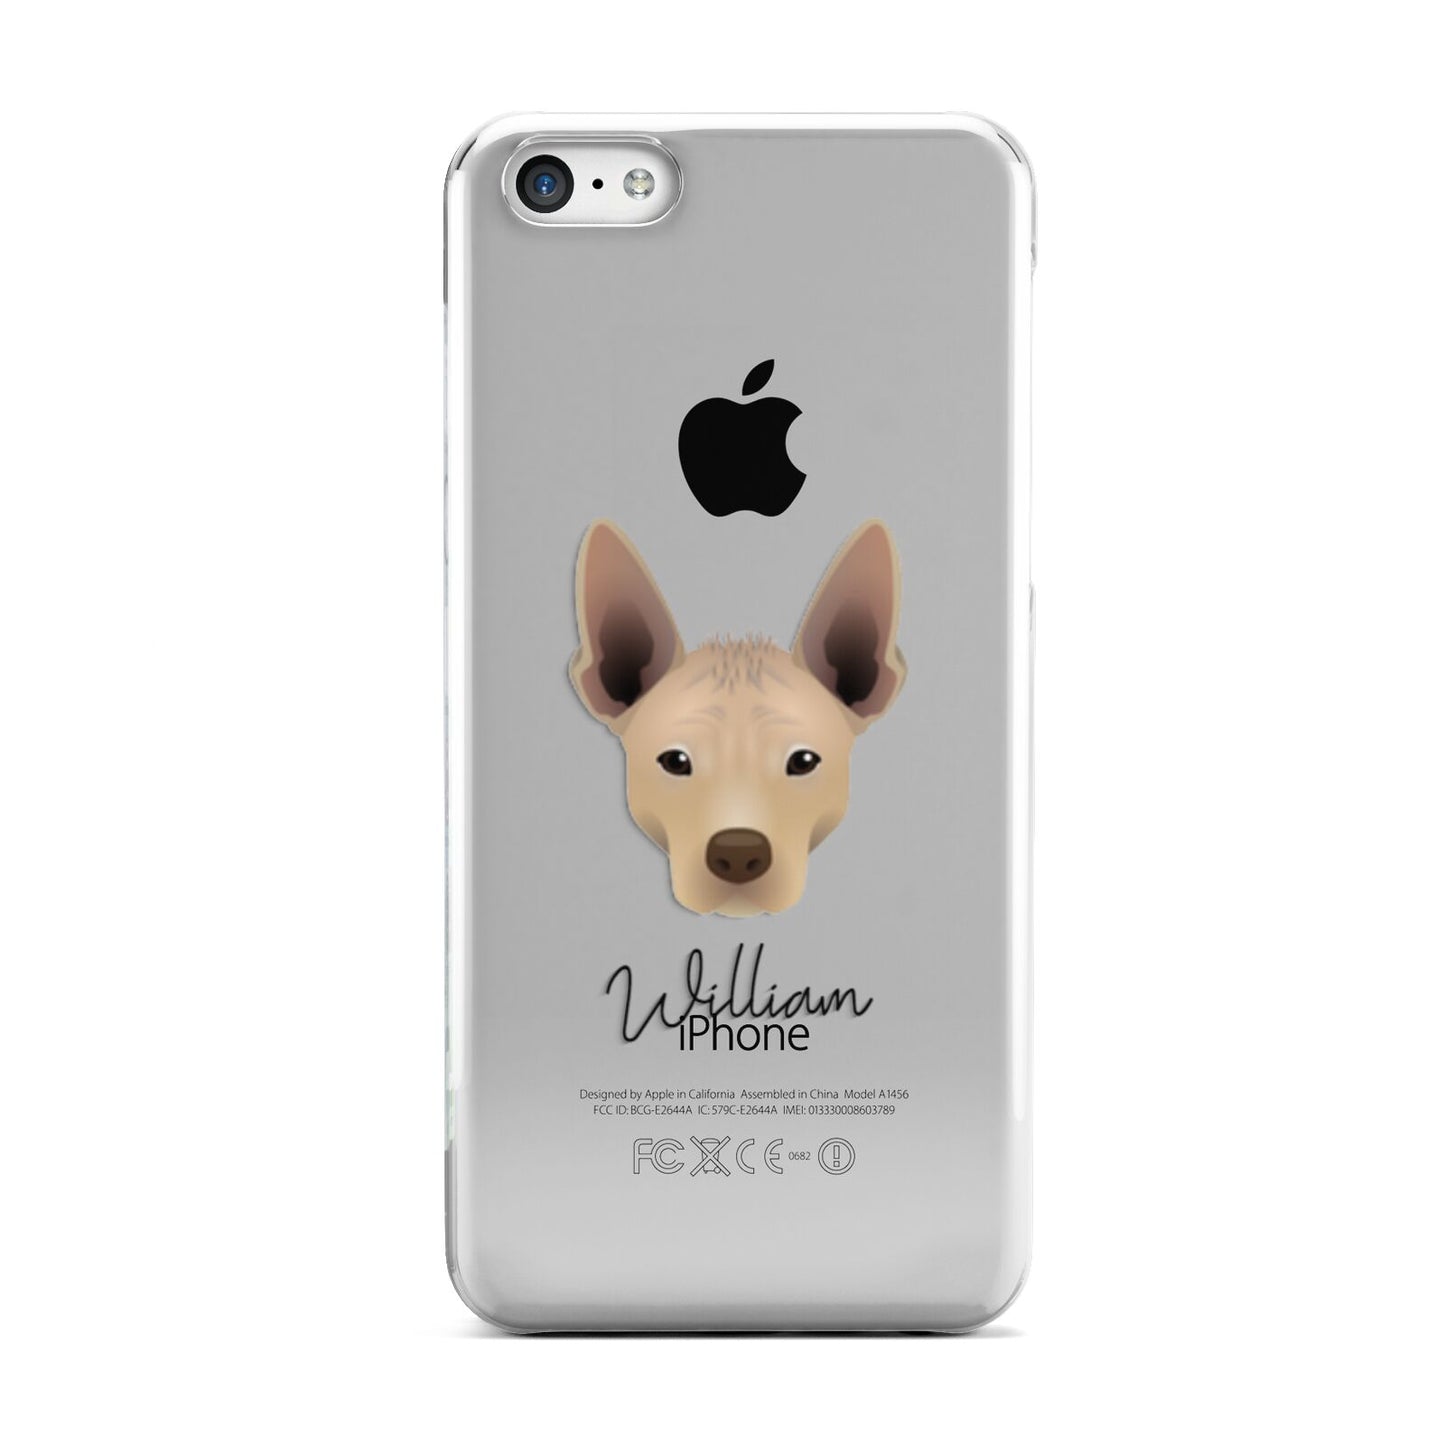 Mexican Hairless Personalised Apple iPhone 5c Case